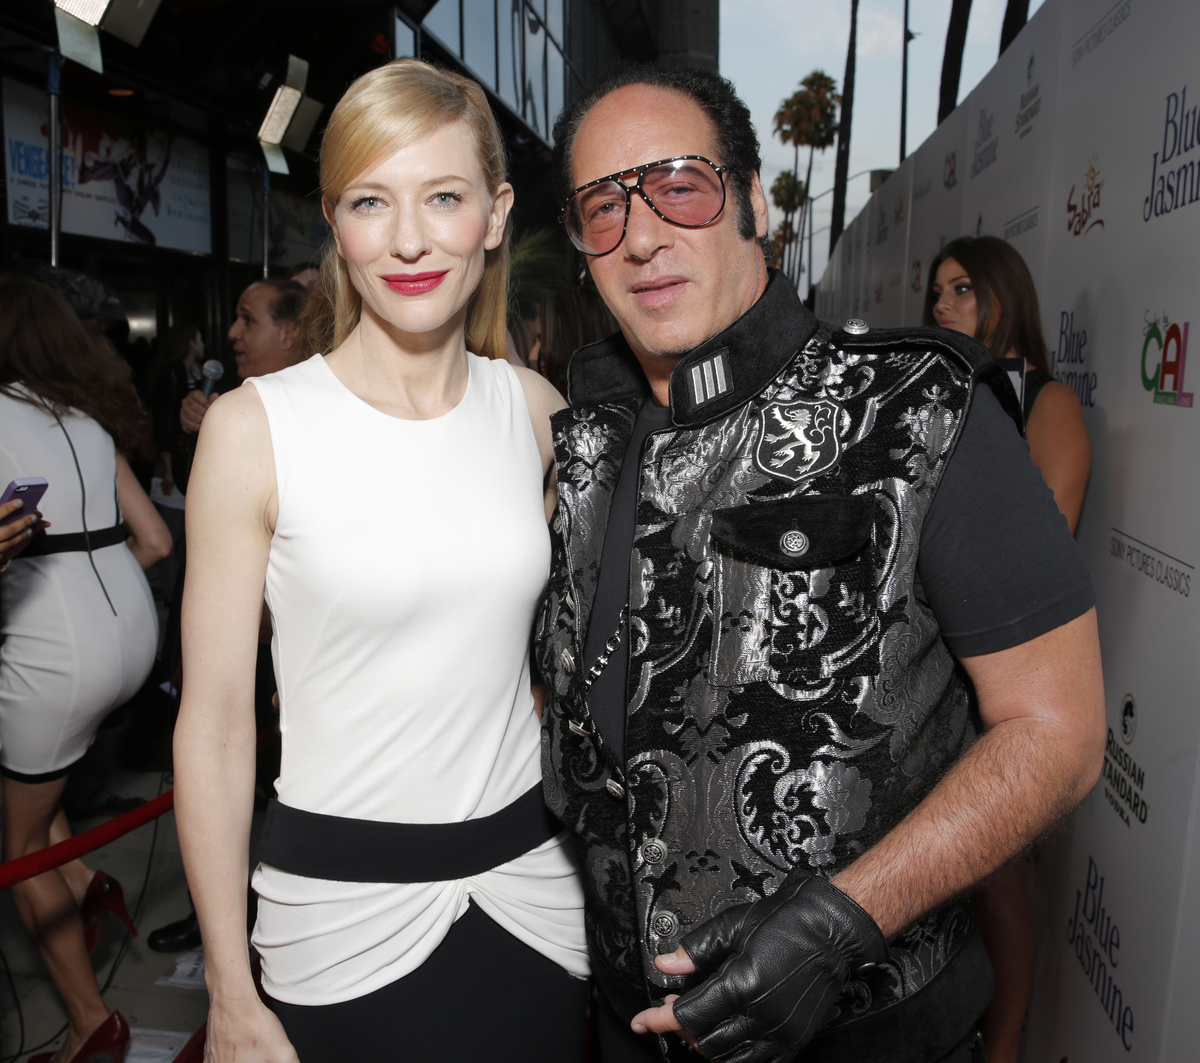 Cate Blanchett and Andrew Dice Clay arrive on the red carpet at Sony Pictures Classics LA premiere of Blue Jasmine presented by The One Group on Wednesday, July 24, 2013 in Los Angeles. (Photo by Todd Williamson/Invision for Sony Pictures Classics/AP)